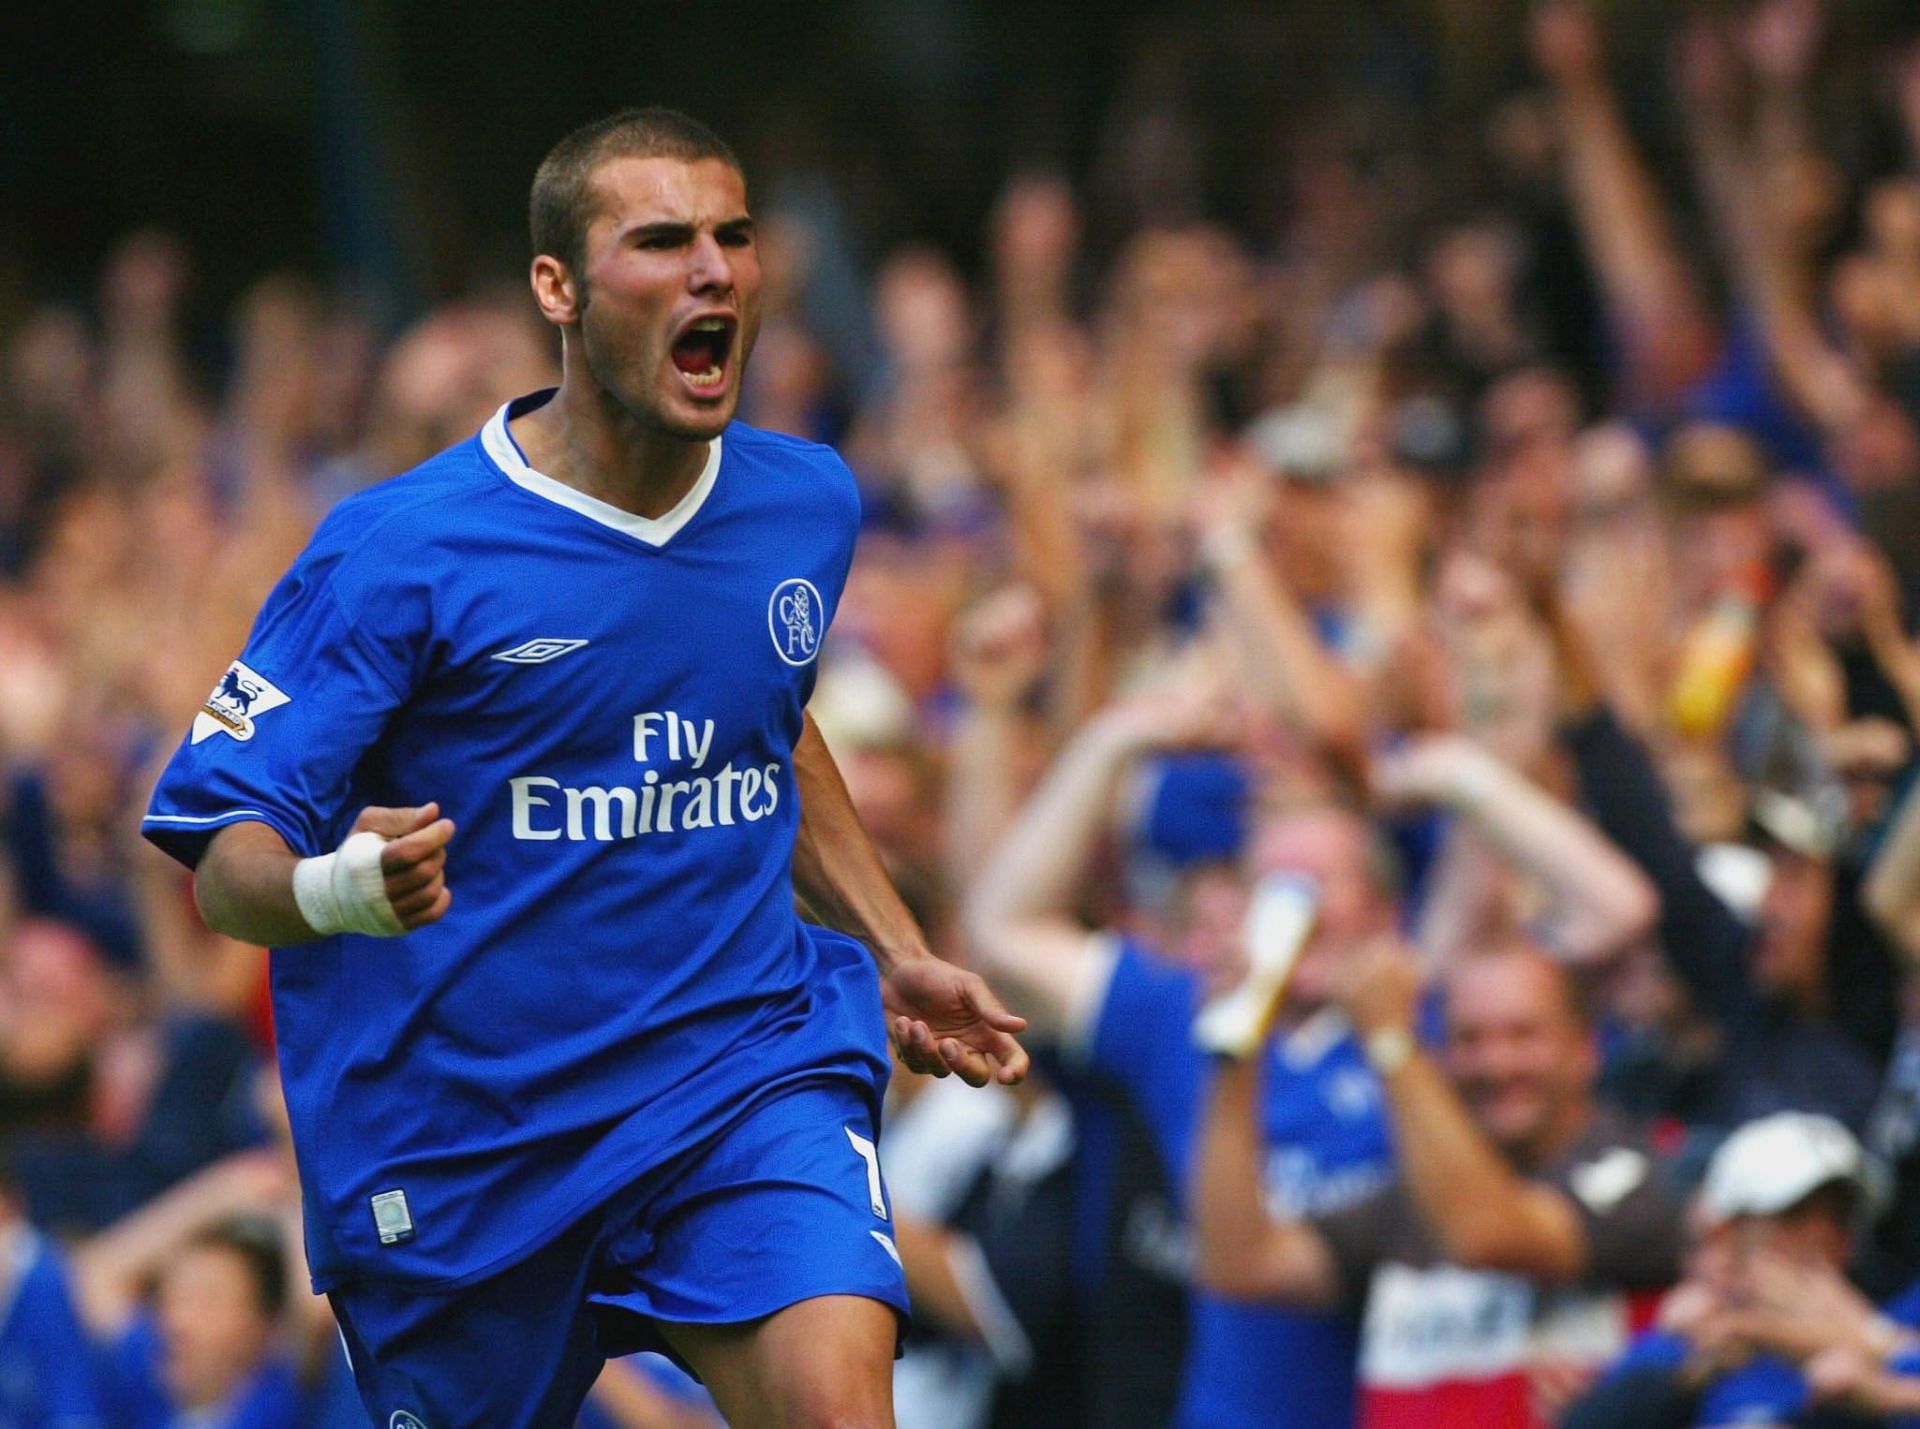 Adrian Mutu of Chelsea starts to celebrate scoring a goal but it was later disallowed.